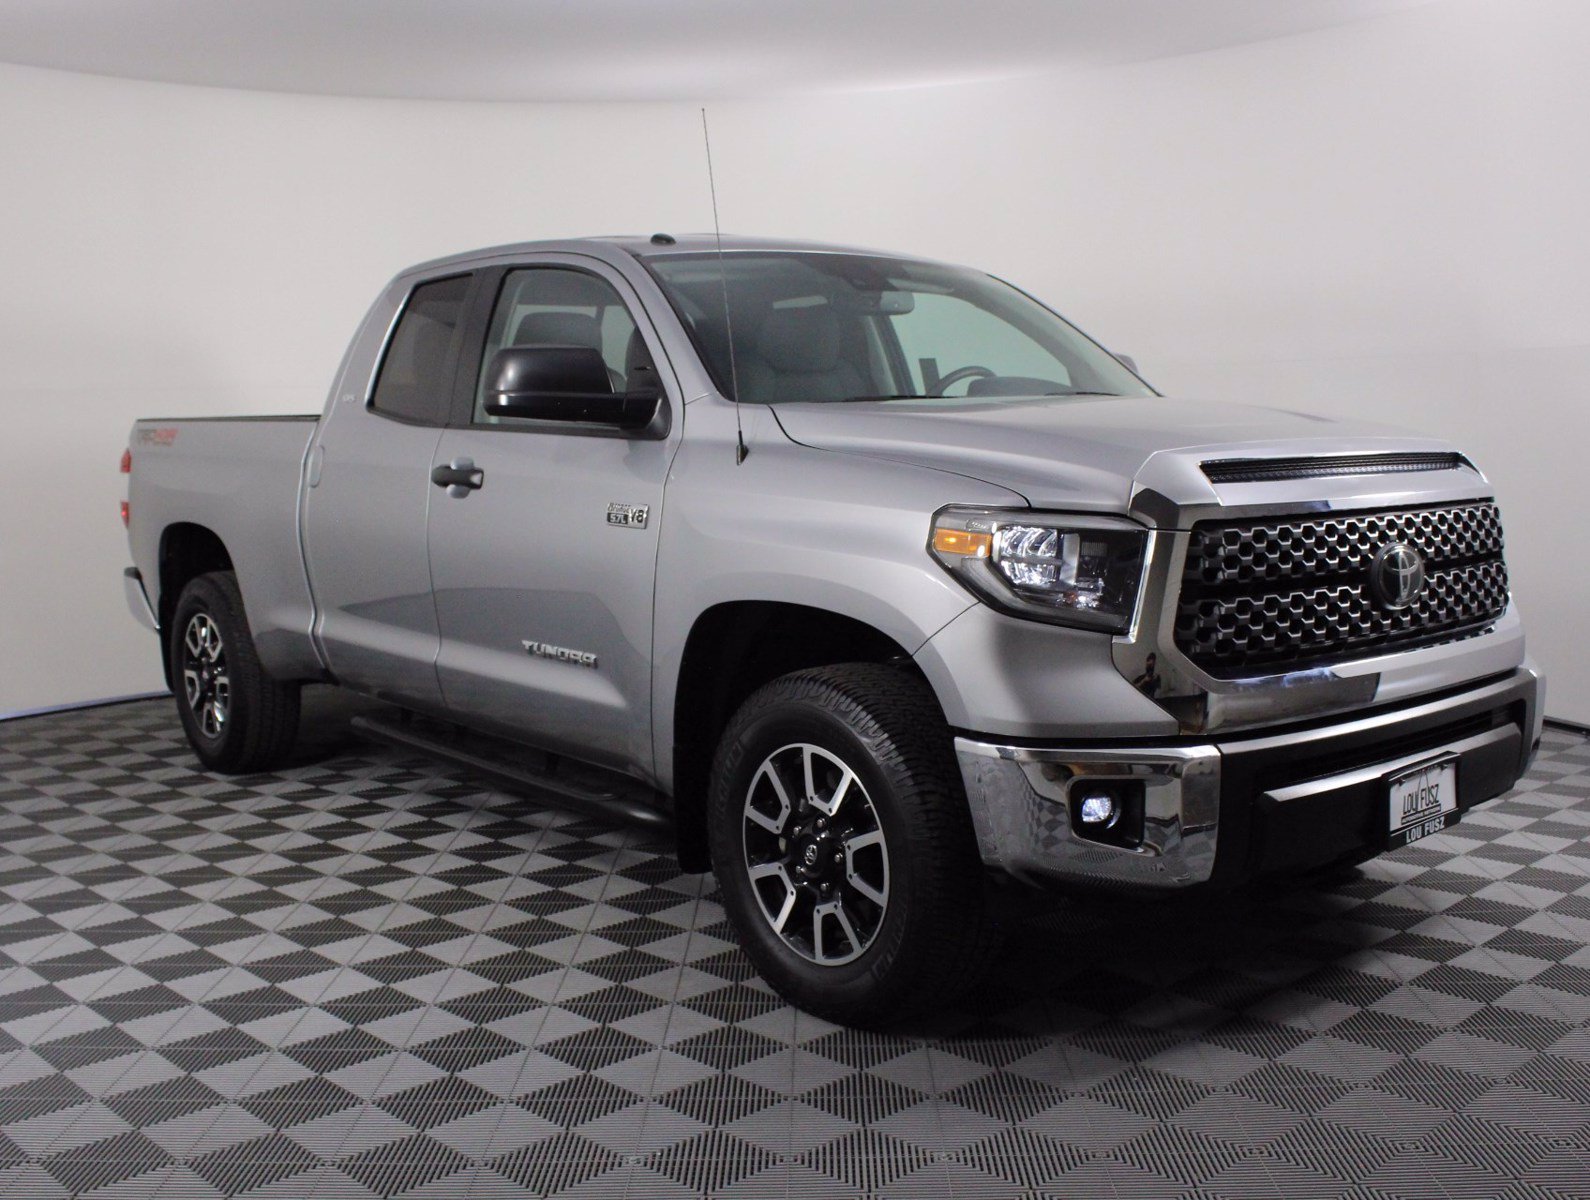 Certified Pre-Owned 2018 Toyota Tundra 4WD SR5 4WD Crew Cab Pickup